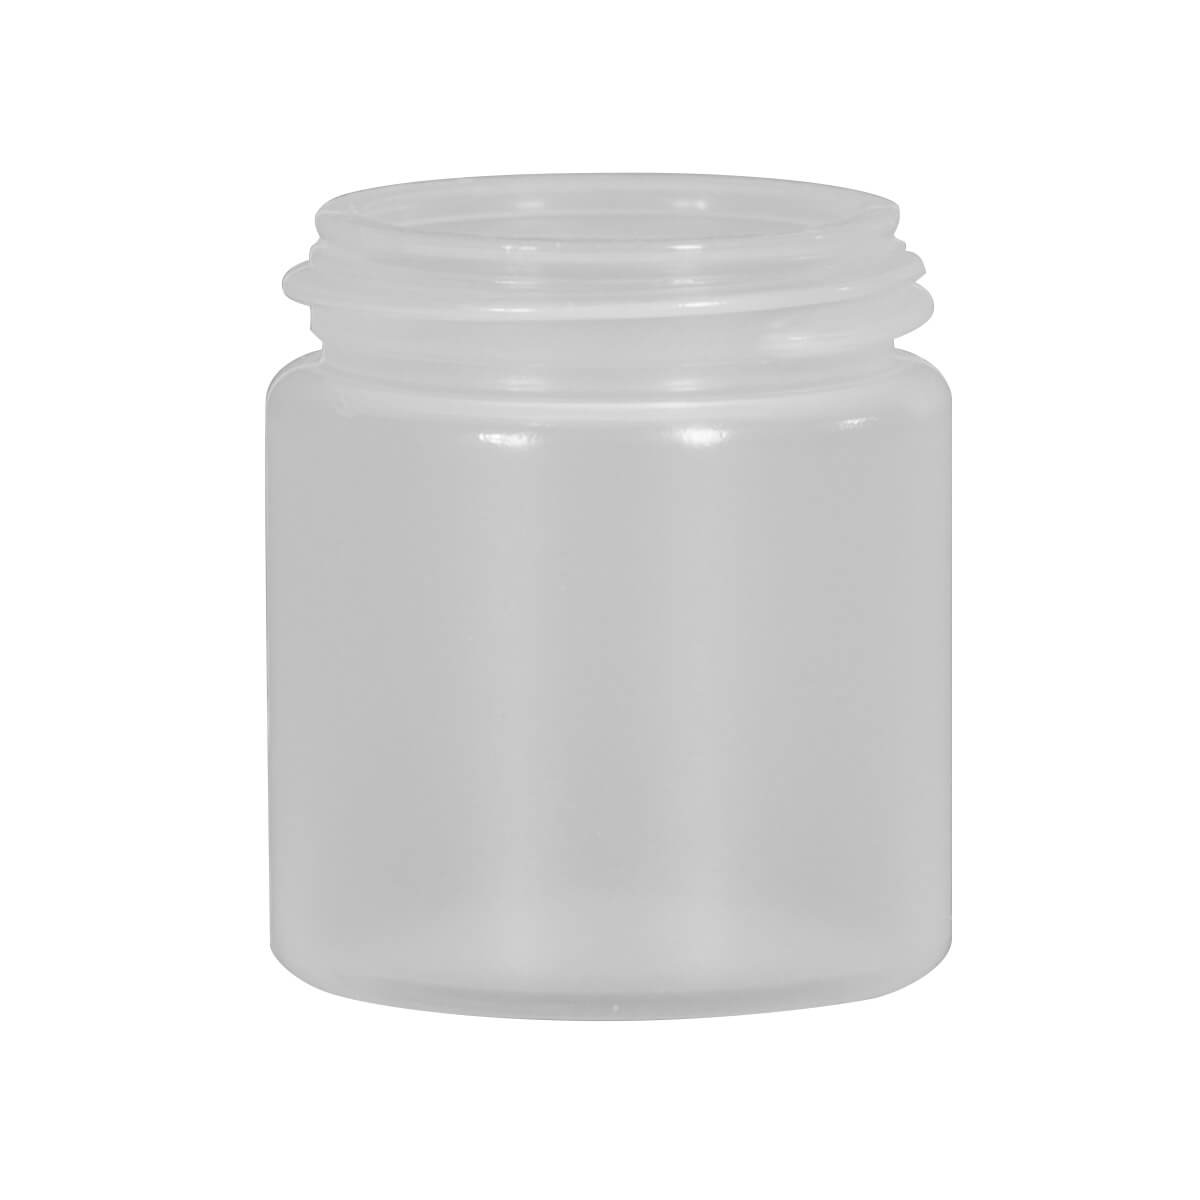 4 oz Clear Square Glass Spice Jar (White PP Cap) - 12/Case, Clear Type III 43-485